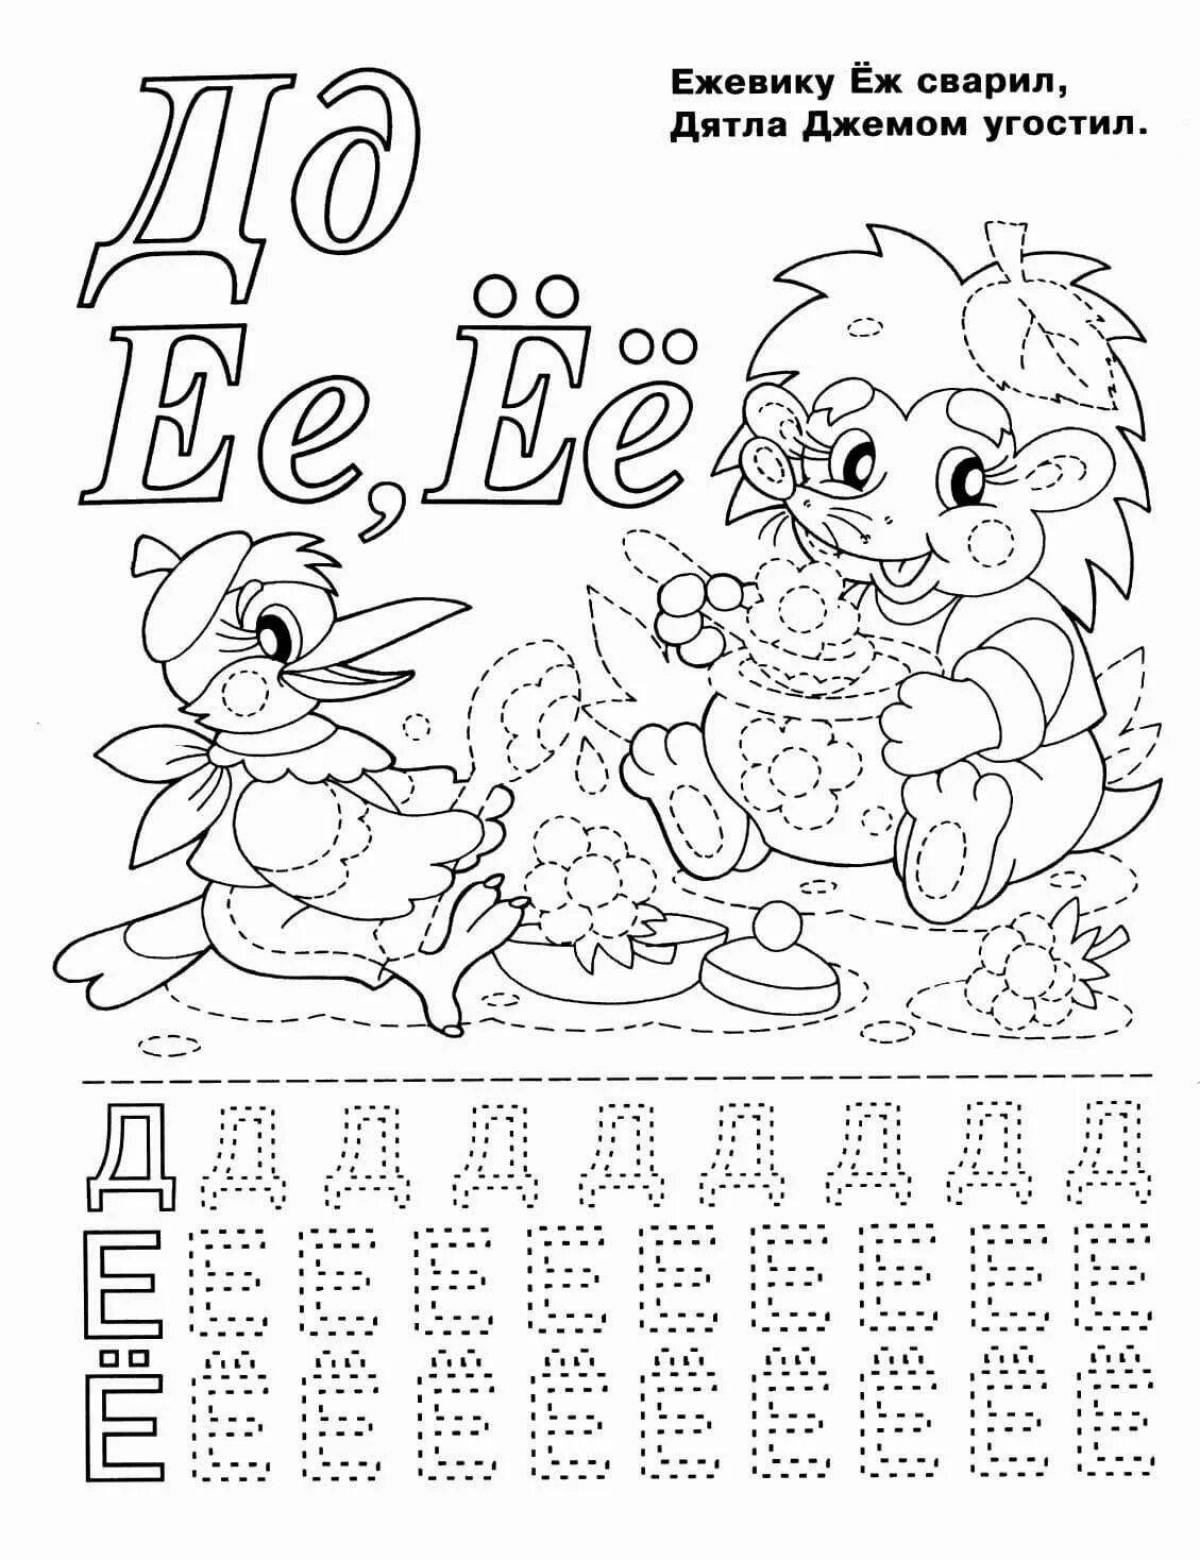 Attractive alphabet for coloring pages